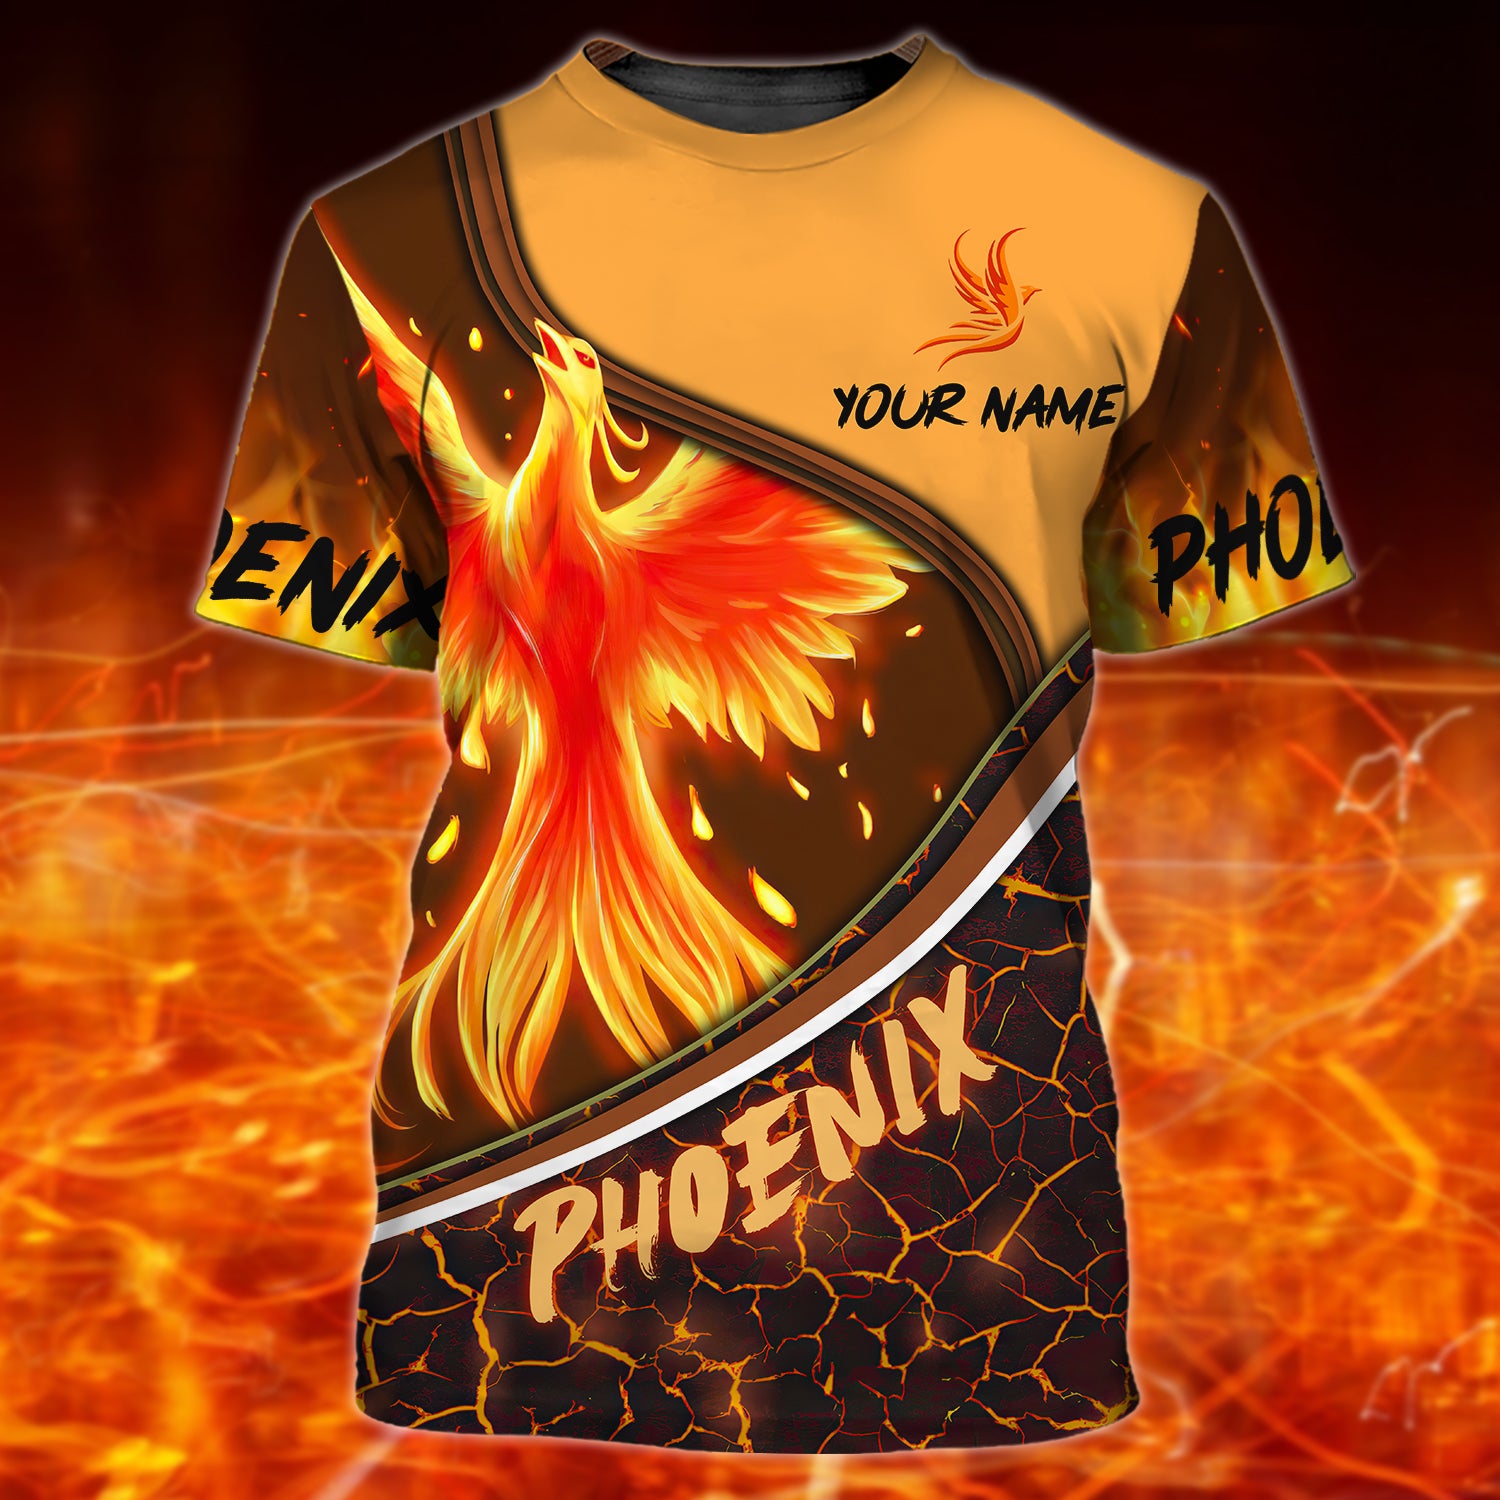 Fire Phoenix - Personalized Name 3D T Shirt - Nt168 - Ct073